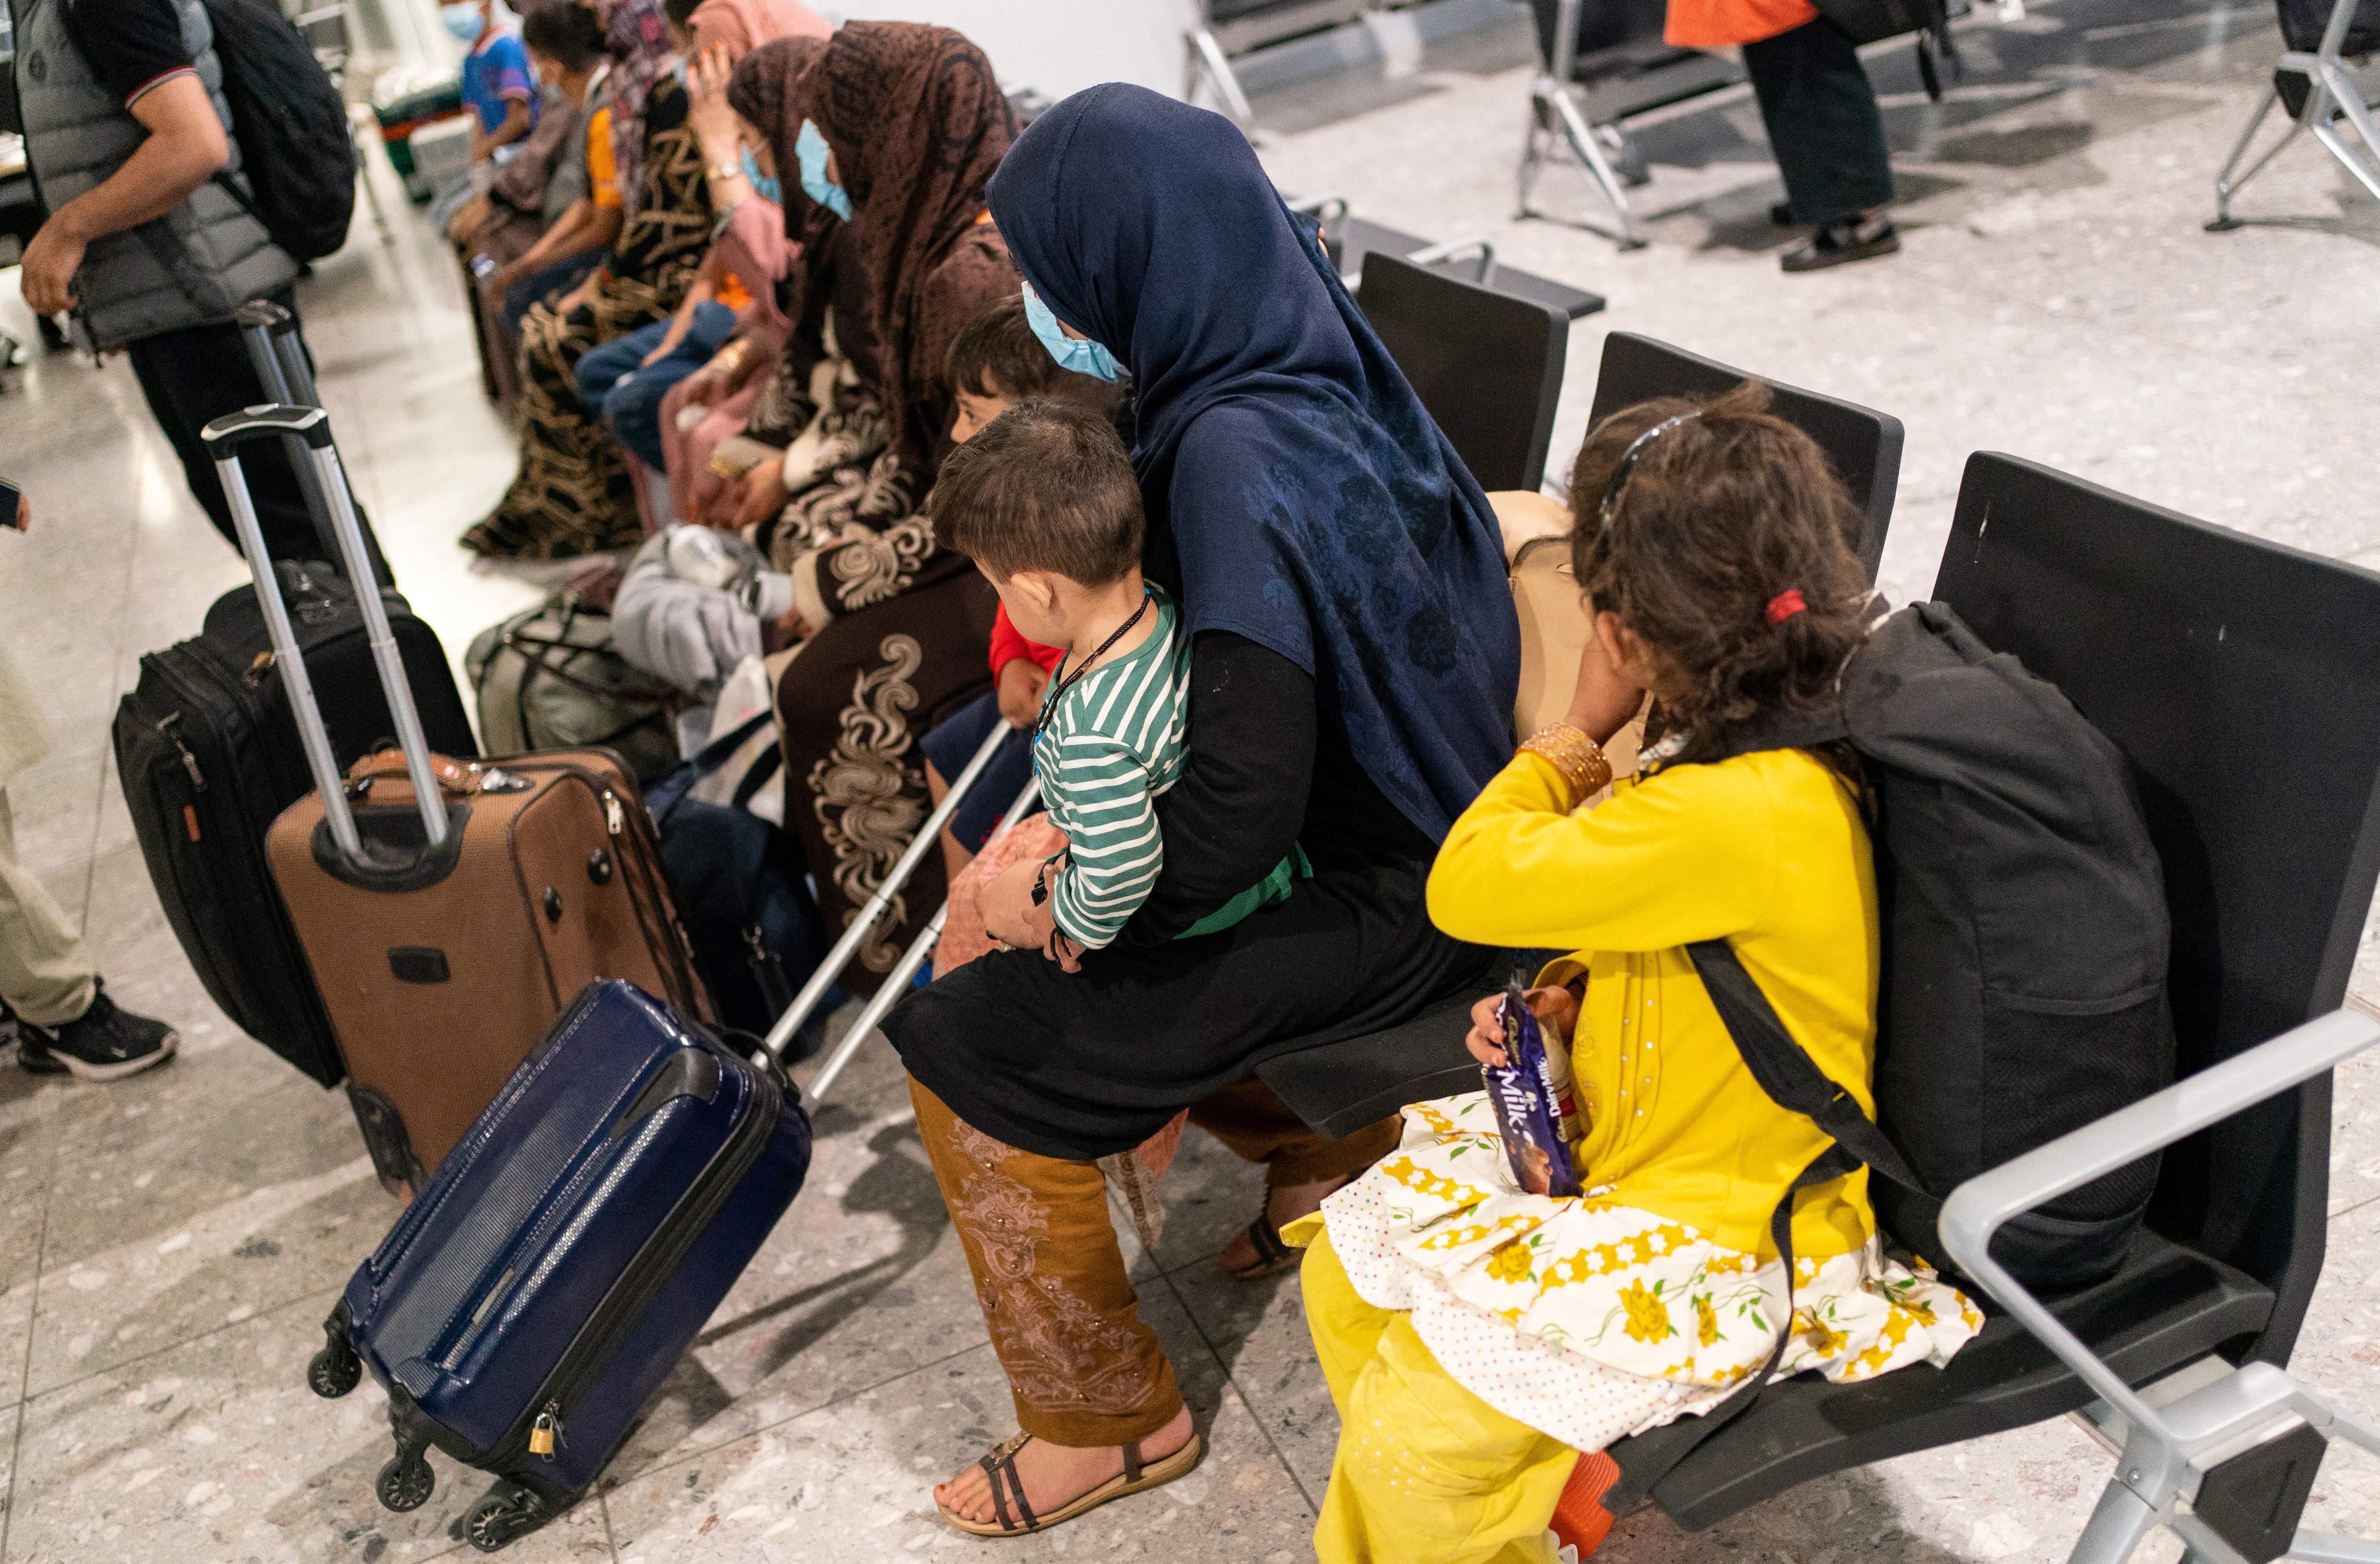 <p>Afghan refugees wait to be processed after arriving at Heathrow airport on an evacuation flight from Afghanistan</p>